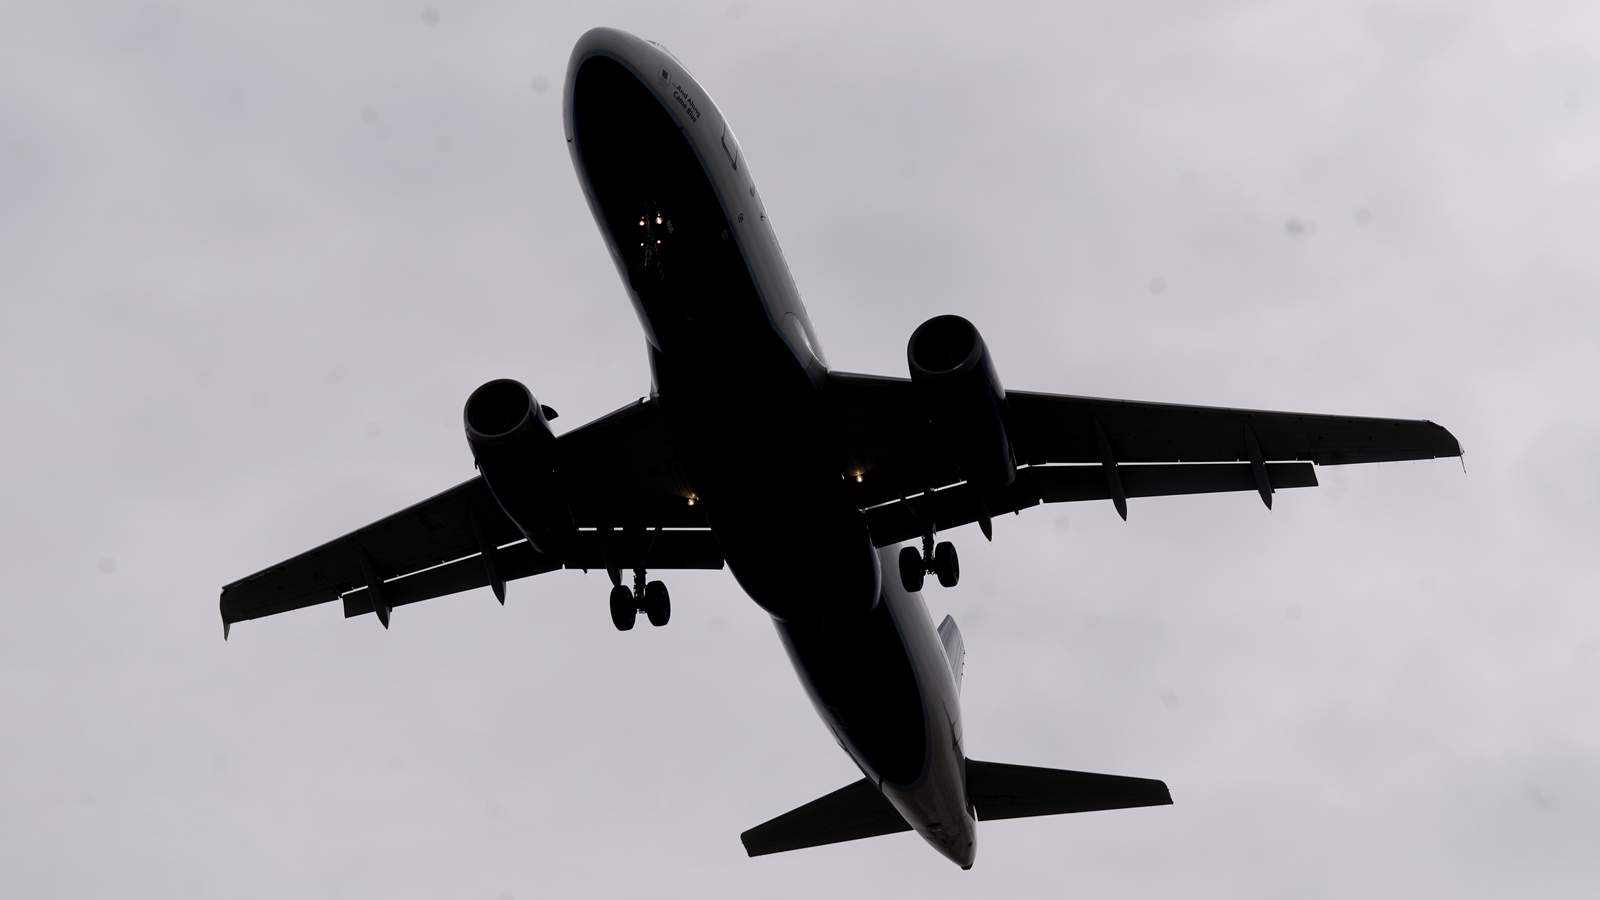 Nightside Report April 12, 2021: Michiganders trying to fly back from Florida hit with delays, cancellations; New state program aims to provide struggling residents with rental assistance